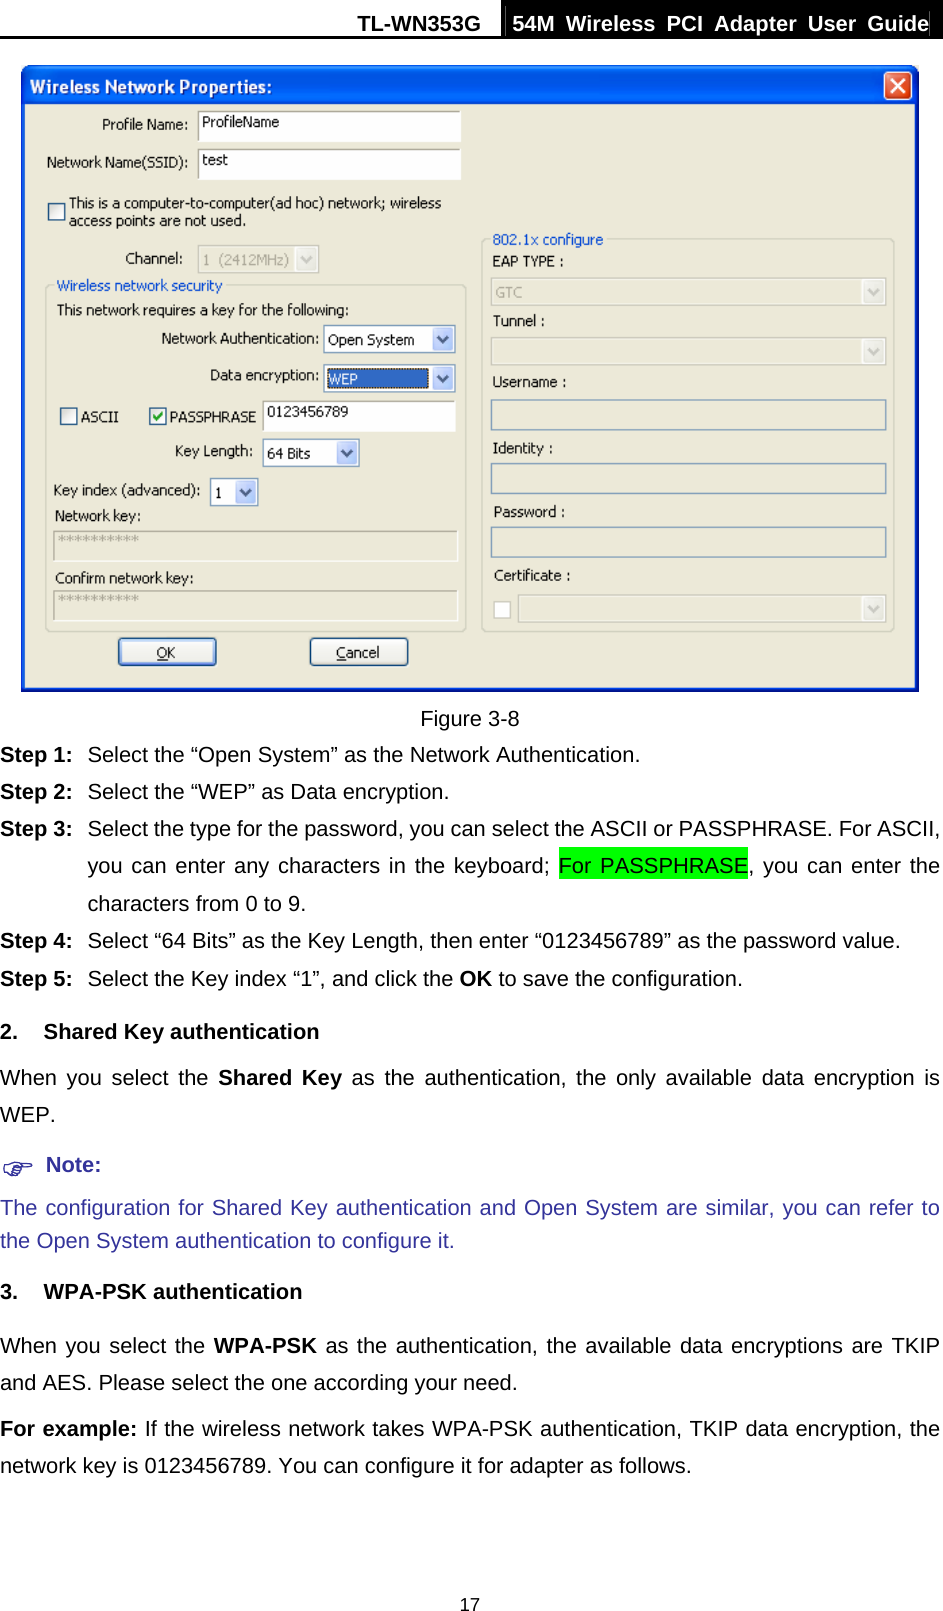 TL-WN353G  54M Wireless PCI Adapter User Guide   17 Figure 3-8 Step 1:  Select the “Open System” as the Network Authentication. Step 2:  Select the “WEP” as Data encryption. Step 3:  Select the type for the password, you can select the ASCII or PASSPHRASE. For ASCII, you can enter any characters in the keyboard; For PASSPHRASE, you can enter the characters from 0 to 9. Step 4:  Select “64 Bits” as the Key Length, then enter “0123456789” as the password value. Step 5:  Select the Key index “1”, and click the OK to save the configuration. 2. Shared Key authentication When you select the Shared Key as the authentication, the only available data encryption is WEP. ) Note: The configuration for Shared Key authentication and Open System are similar, you can refer to the Open System authentication to configure it. 3. WPA-PSK authentication When you select the WPA-PSK as the authentication, the available data encryptions are TKIP and AES. Please select the one according your need. For example: If the wireless network takes WPA-PSK authentication, TKIP data encryption, the network key is 0123456789. You can configure it for adapter as follows. 